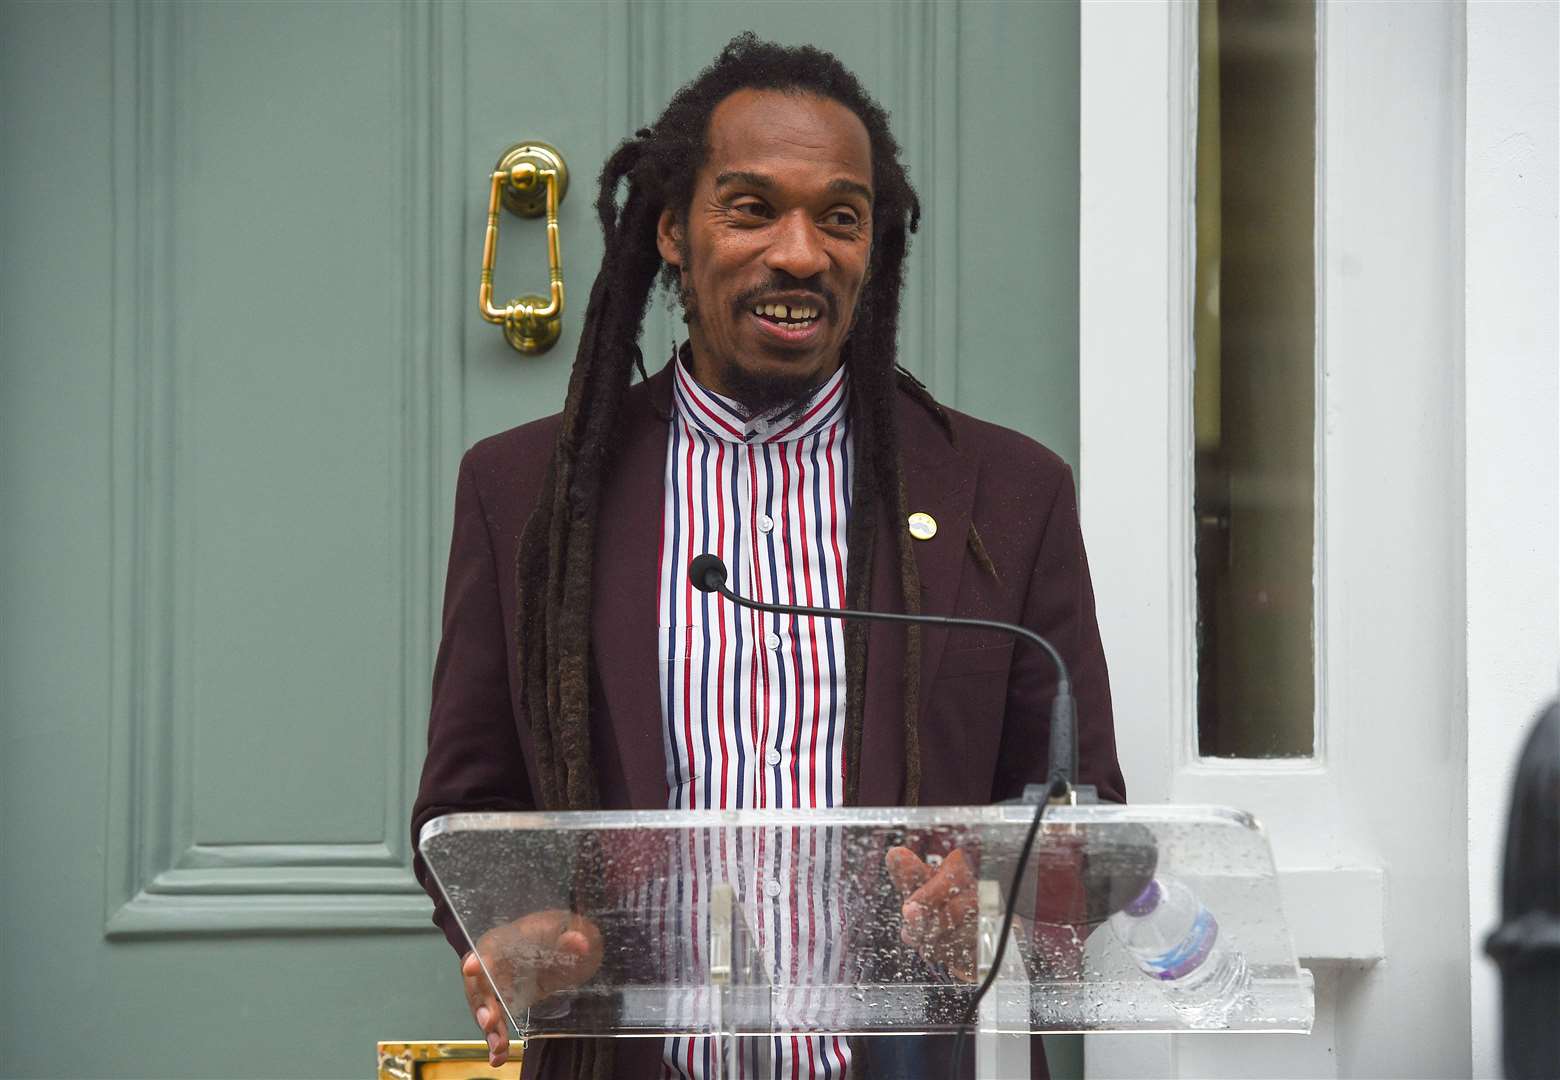 Poet Benjamin Zephaniah rejected an honour due to its reference to the British empire (Kirsty O’Connor/PA)